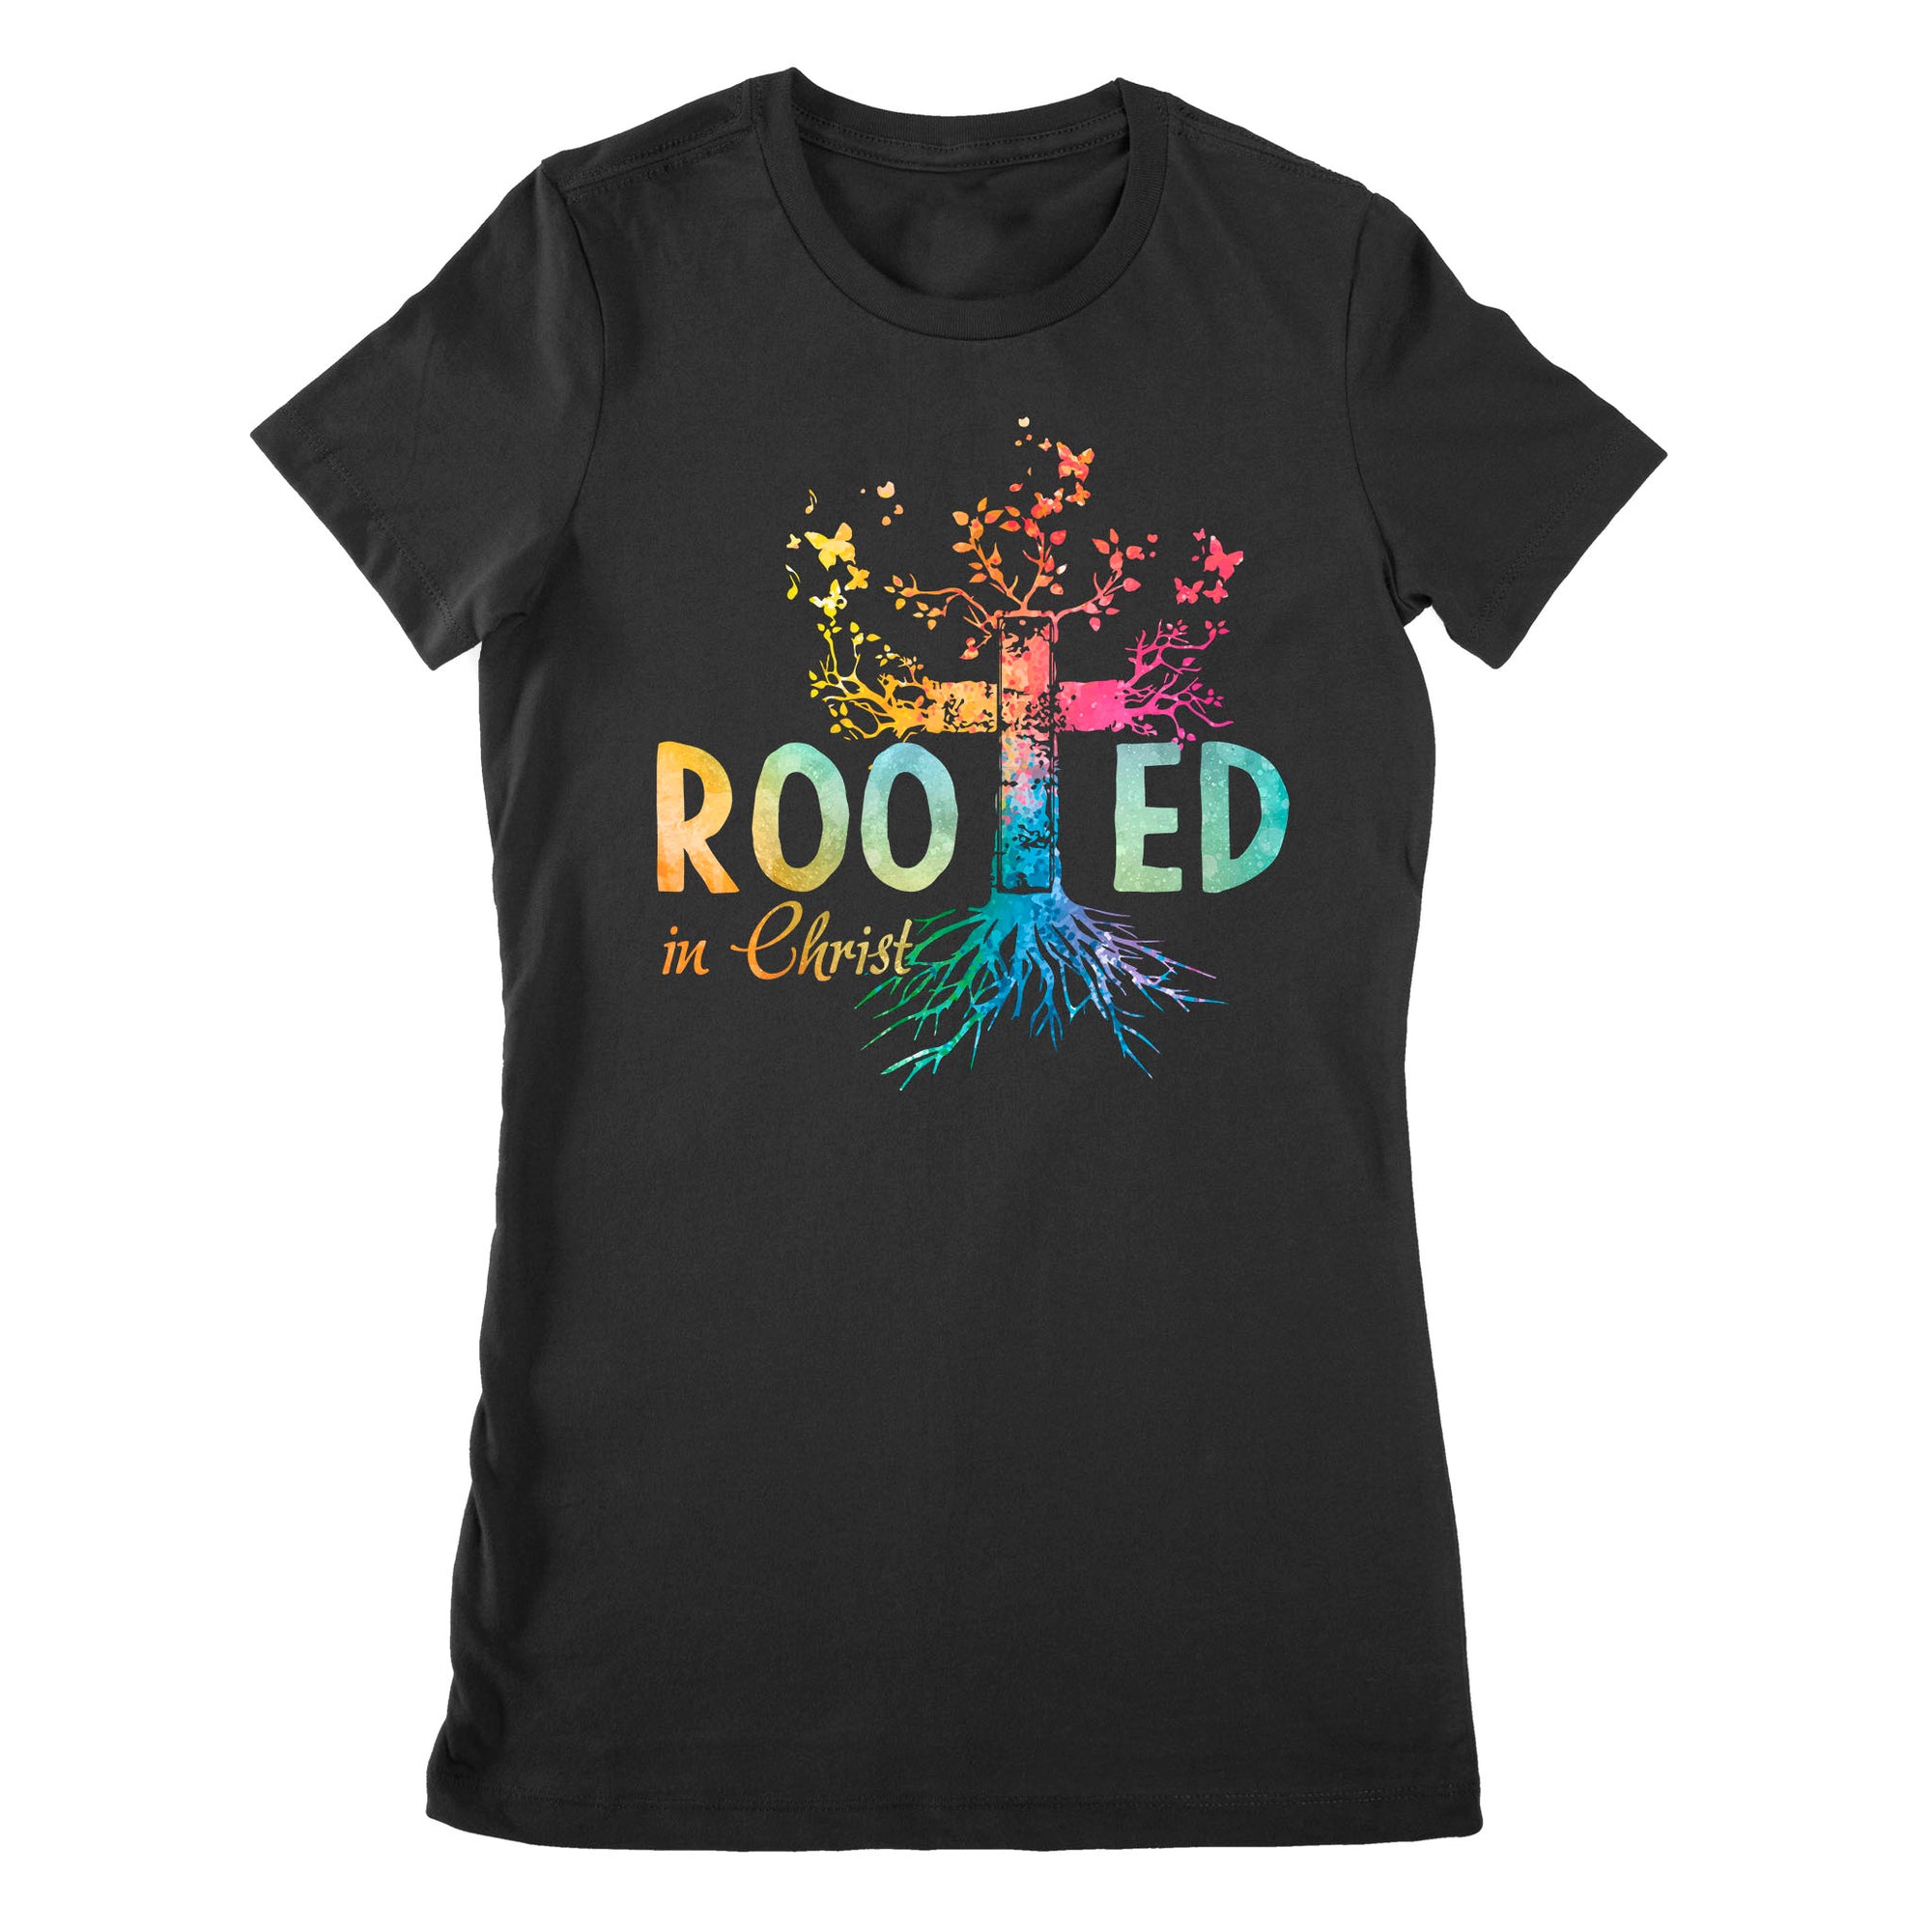 Rooted In Christ - Premium Women's T-shirt